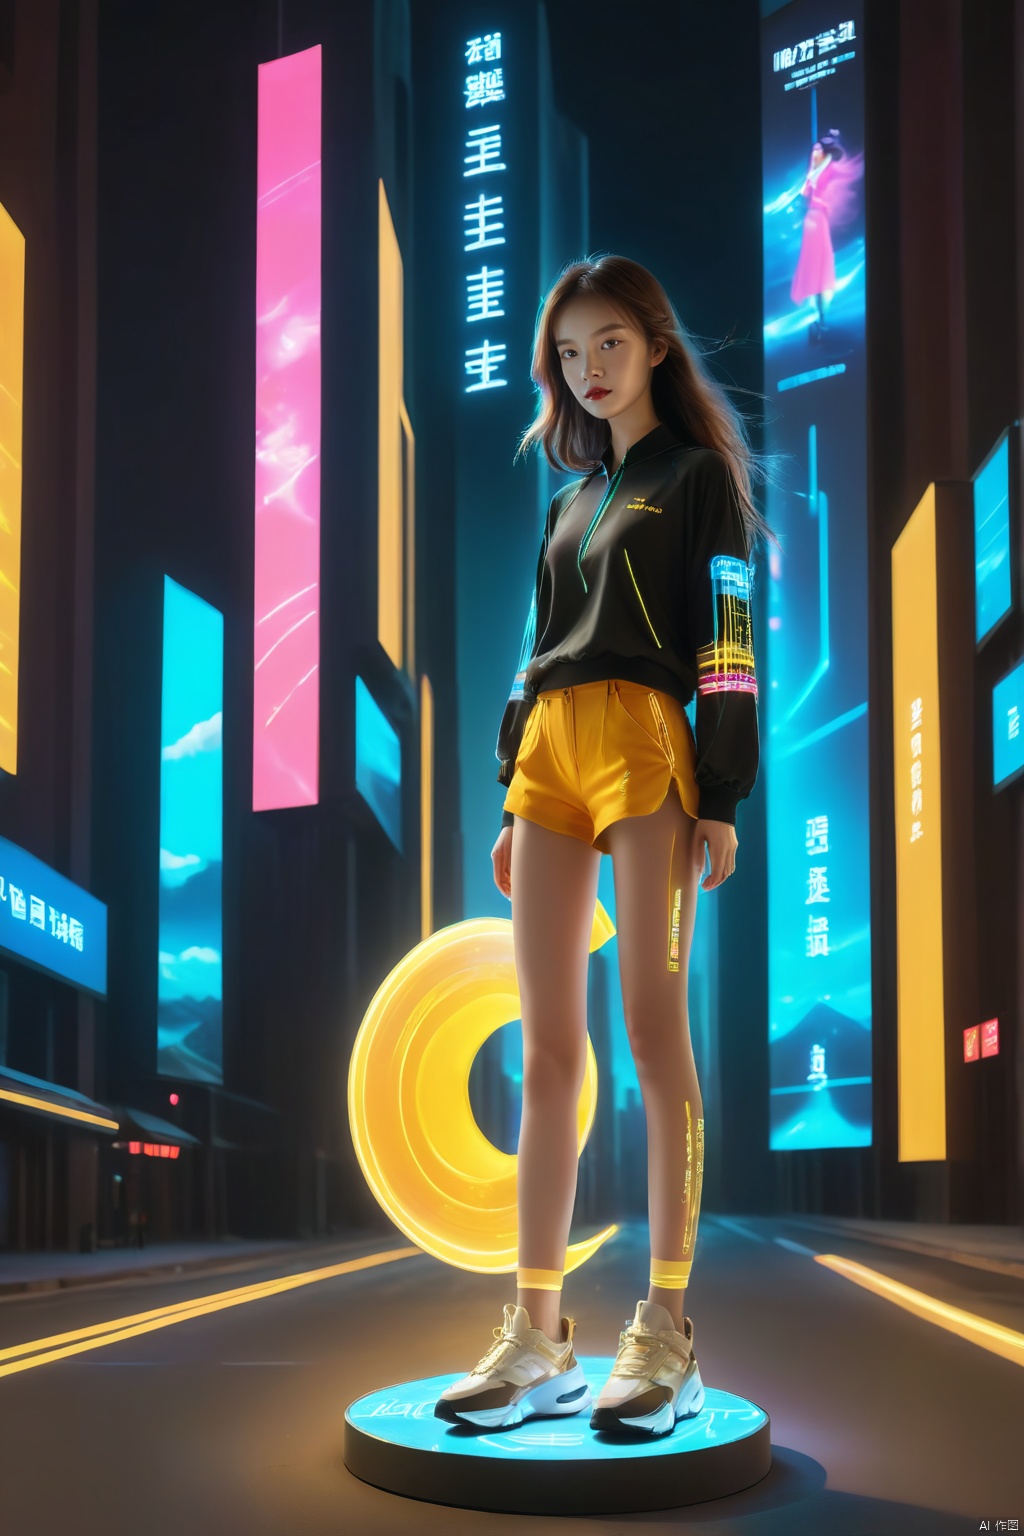 1 girl, solo, long hair, neon light, (full body), night, city street, luminous text on the body, multi-line light on the body, (luminous electronic screen),(electronic message flow: 1.3), holographic projection, (luminous electronic screen on the arm: 1.2), luminous text on the thigh, (girl pose: 1.2), luminous electronic shoes, (Masterpiece, best quality: 1.2),16k, horizontal image quality, (luminous electronic screen), electronic message flow, holographic projection,, luminous electronic shoes,scenery